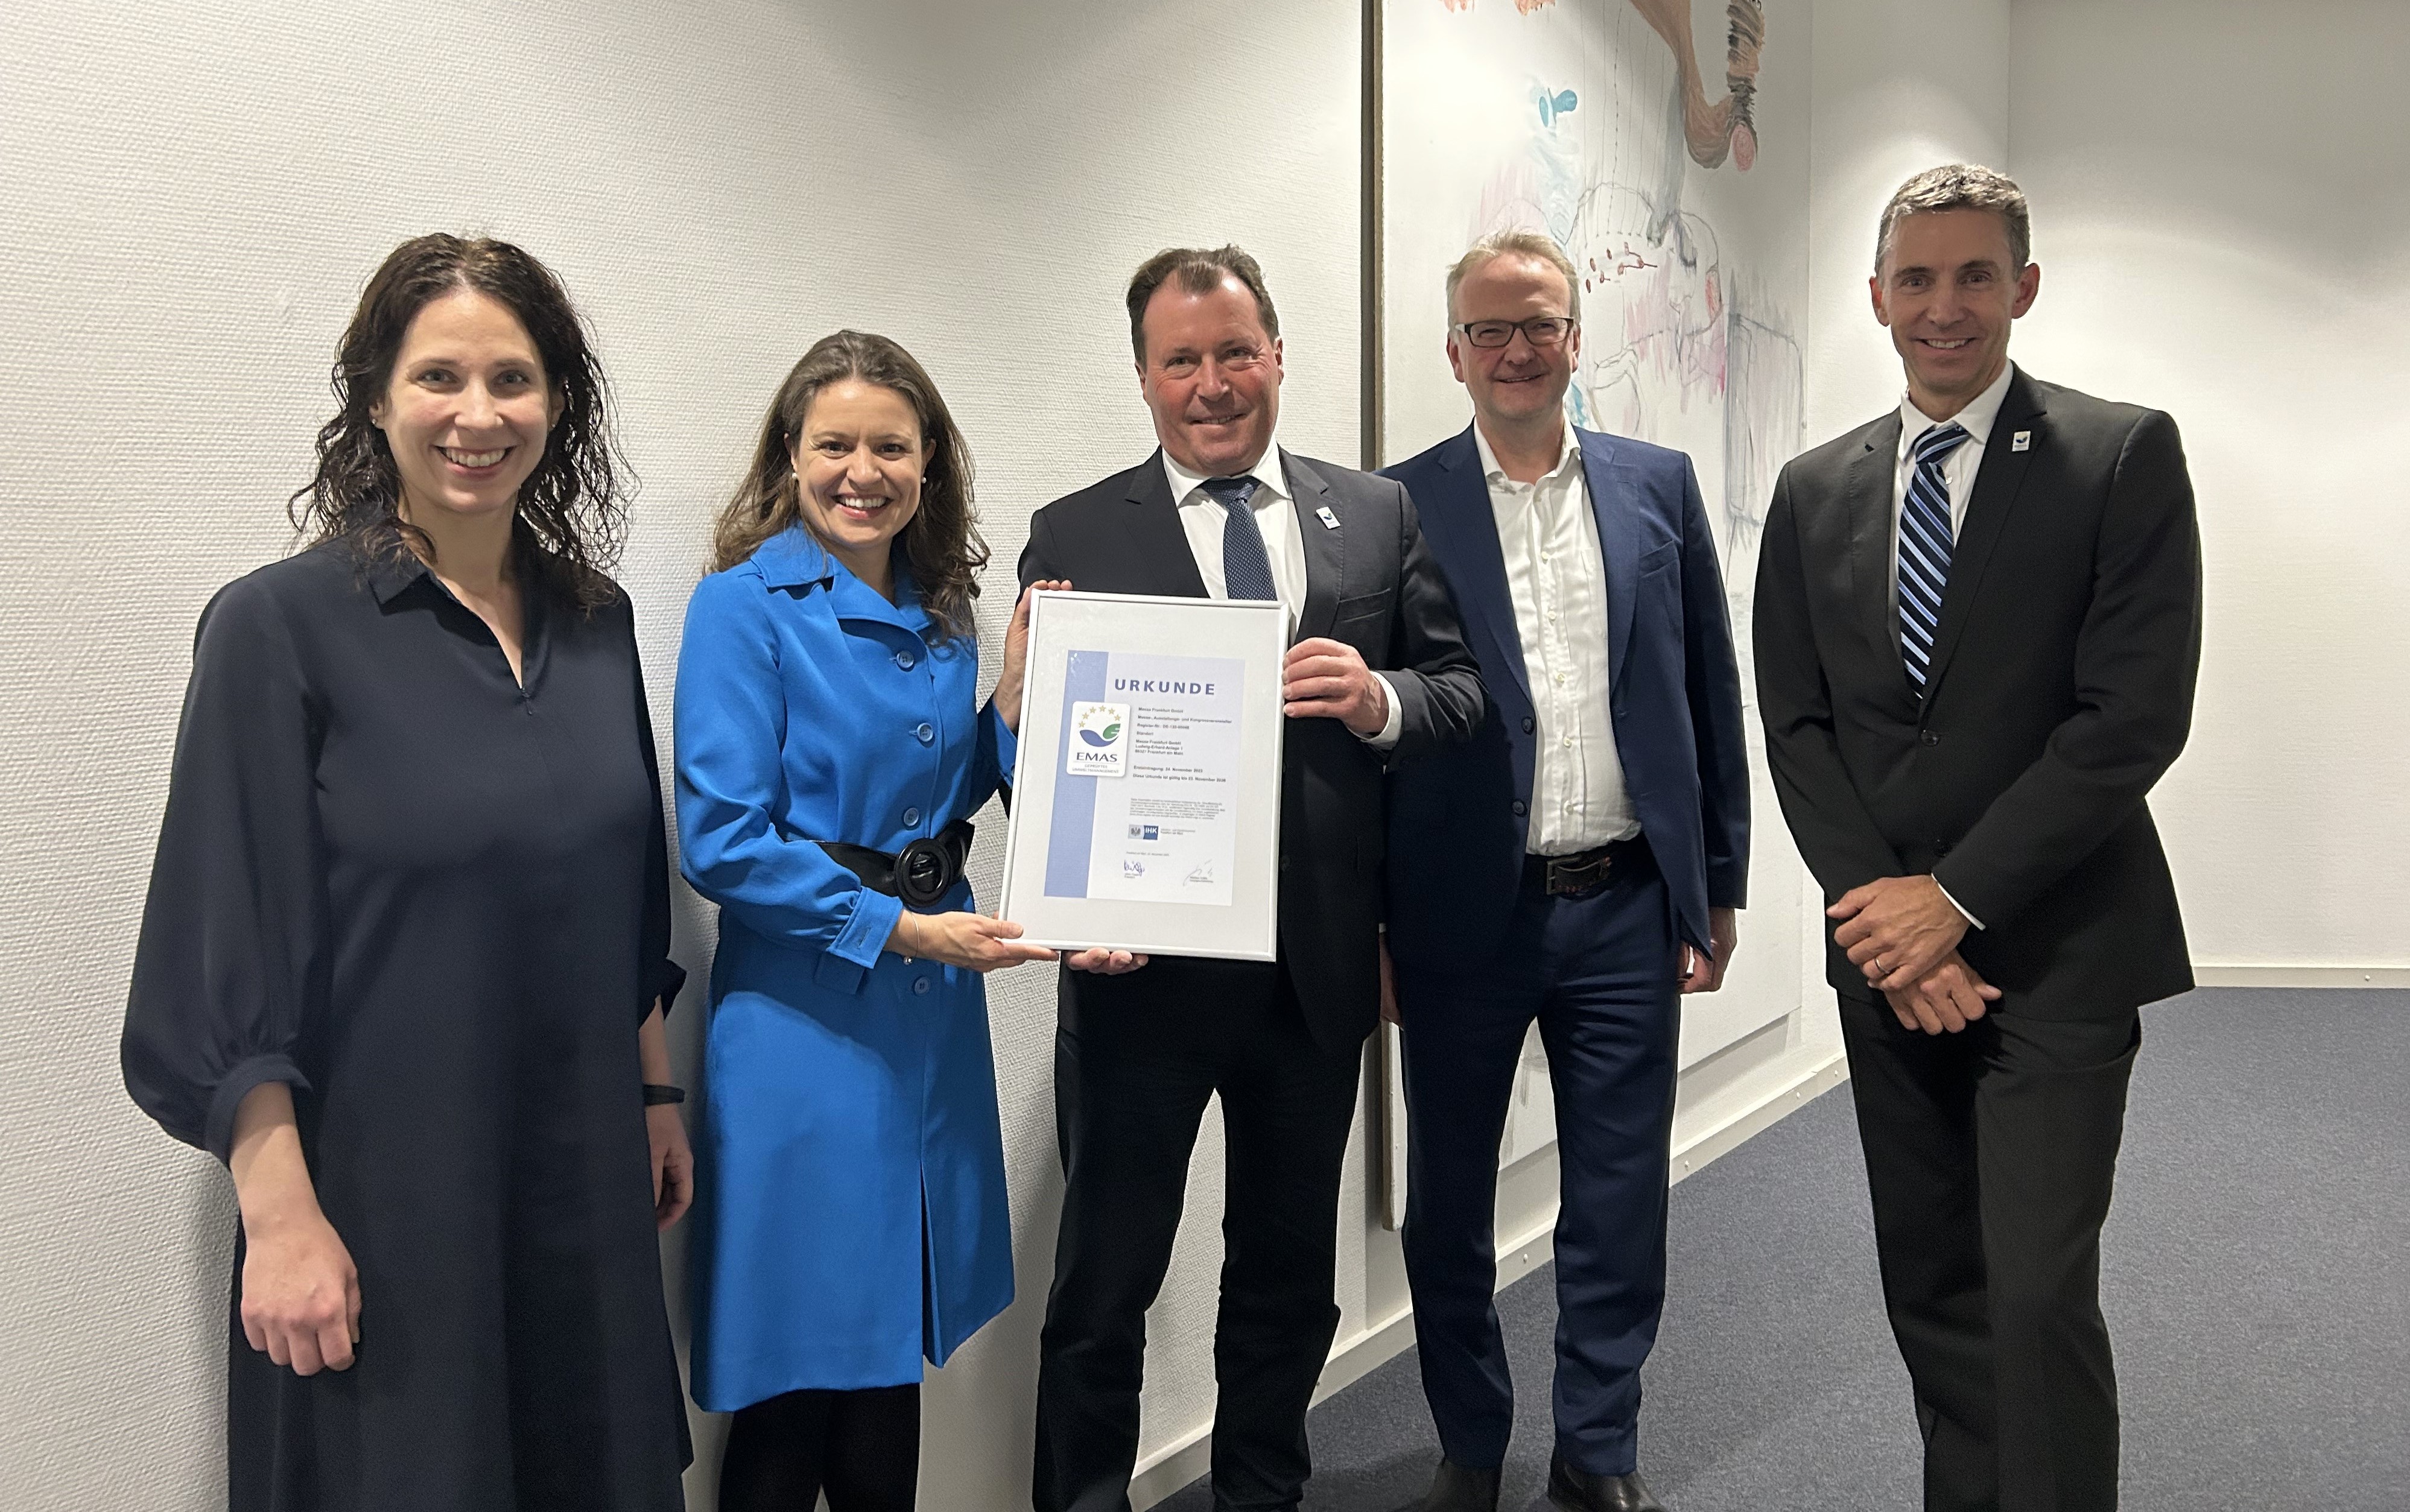 Melanie Nolte, Vice President of the Frankfurt Chamber of Industry and Commerce (IHK Frankfurt), presents the EMAS certificate to Wolfgang Marzin, President and Chief Executive Officer of Messe Frankfurt.